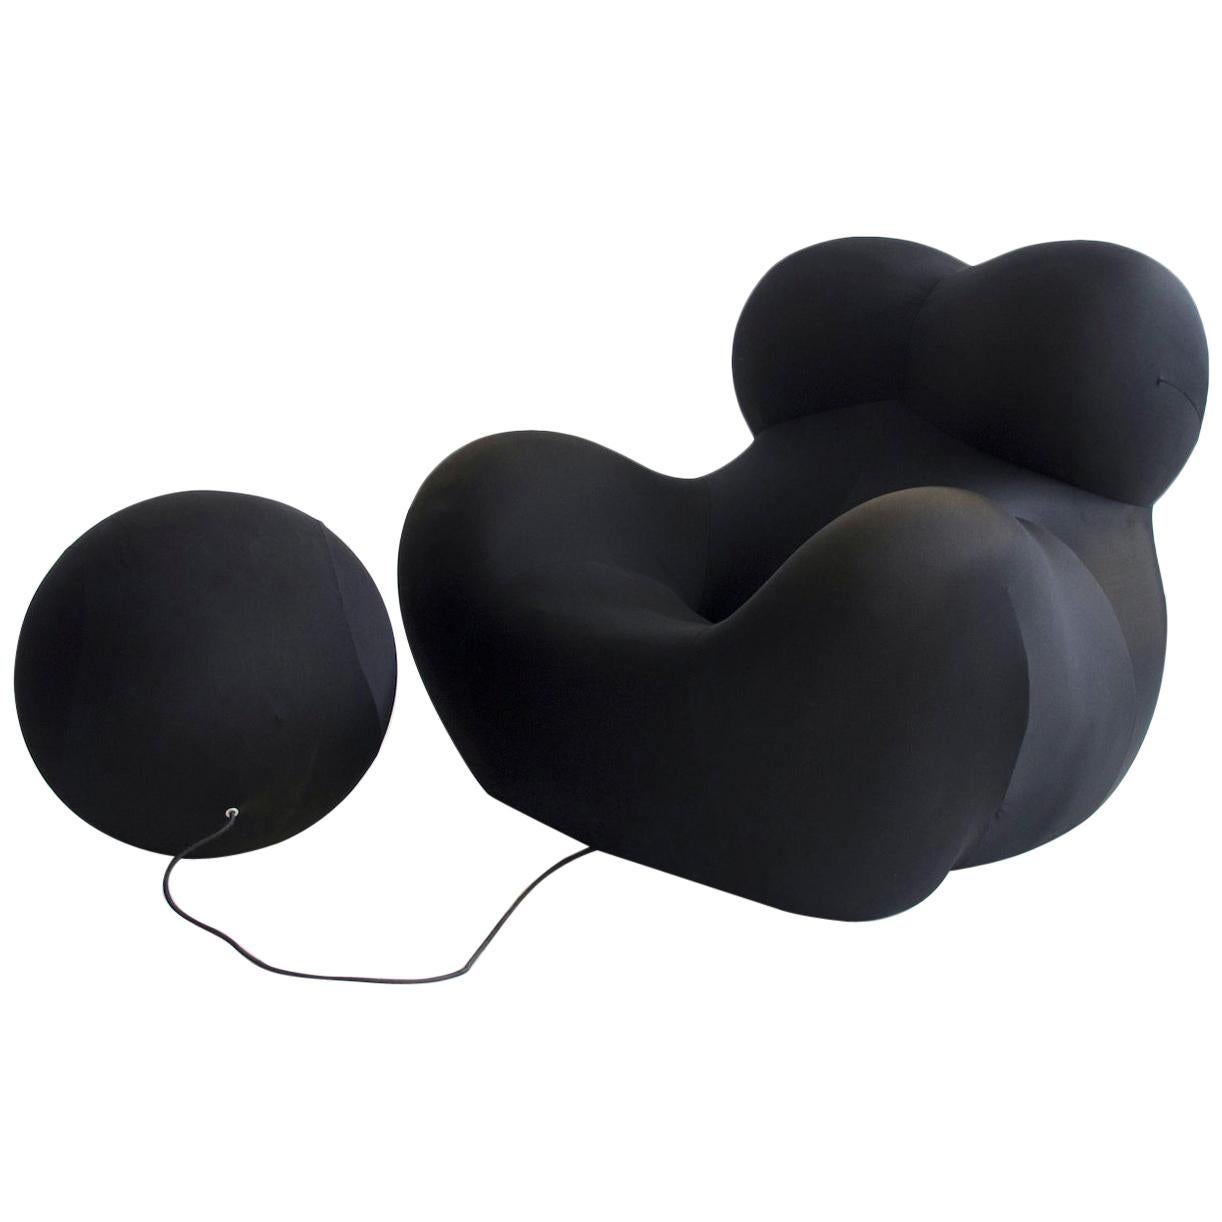 Gaetano Pesce Up 5 Lounge Chair with Ottoman